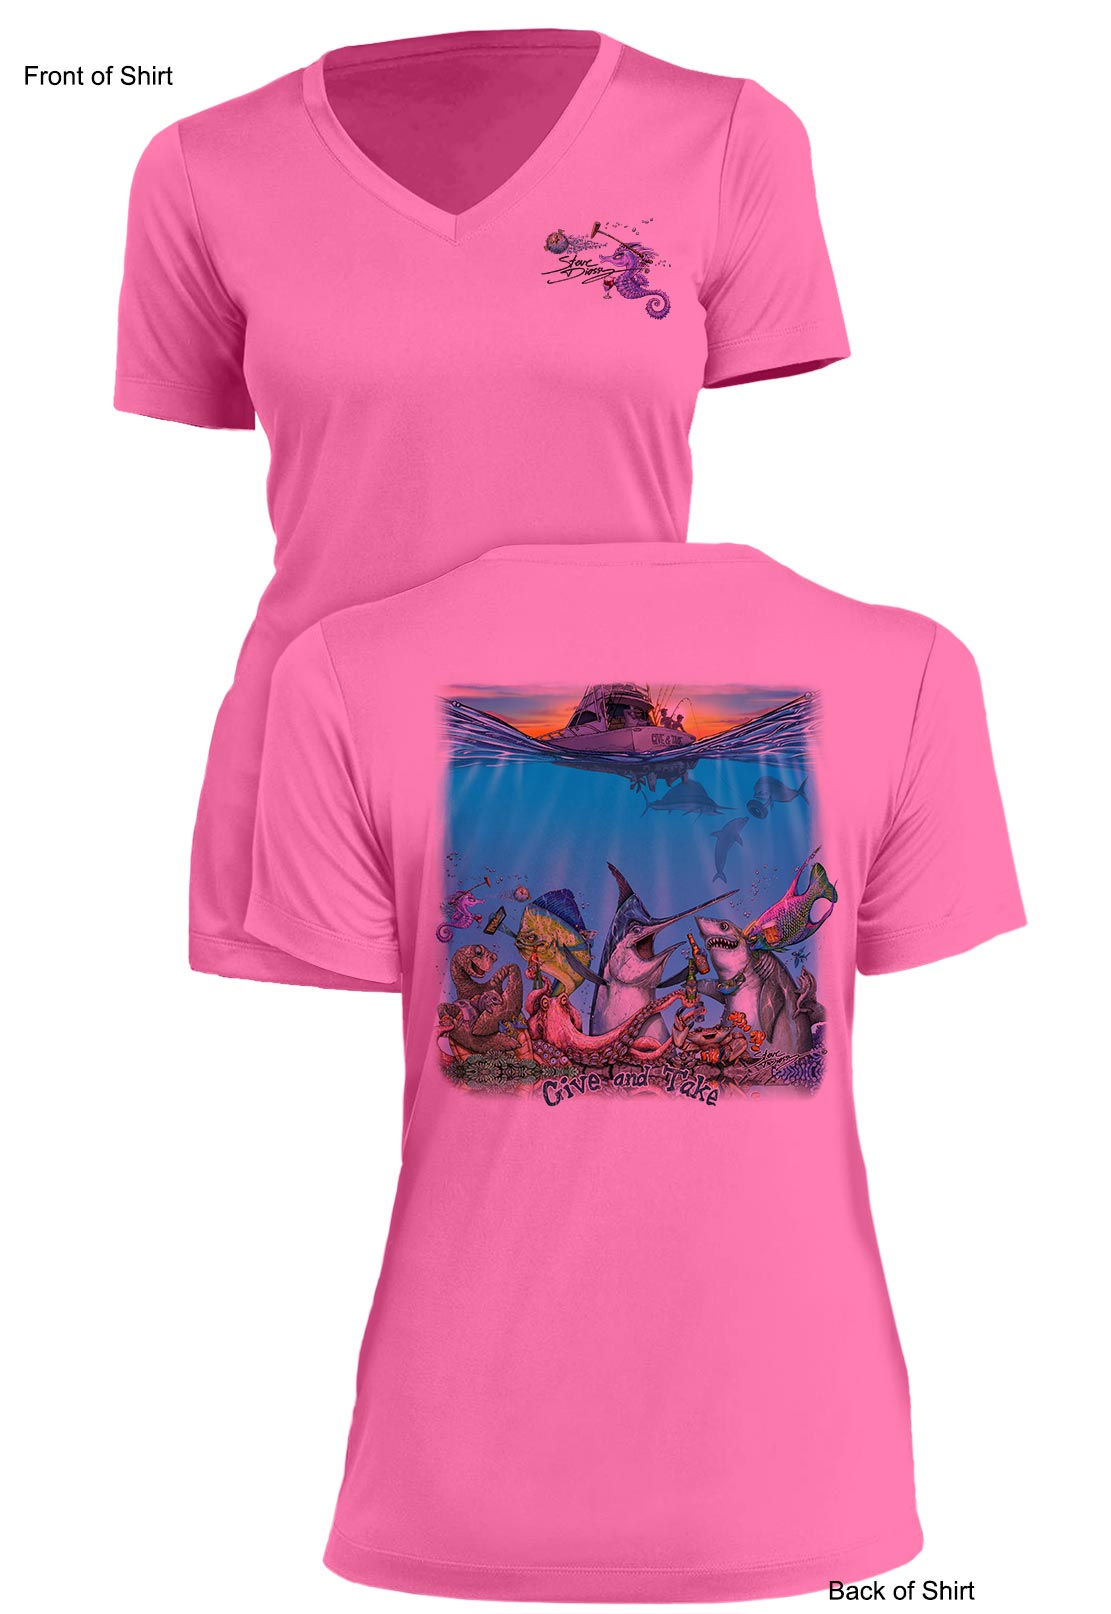 Give and Take - Ladies Short Sleeve V-Neck-100% Polyester